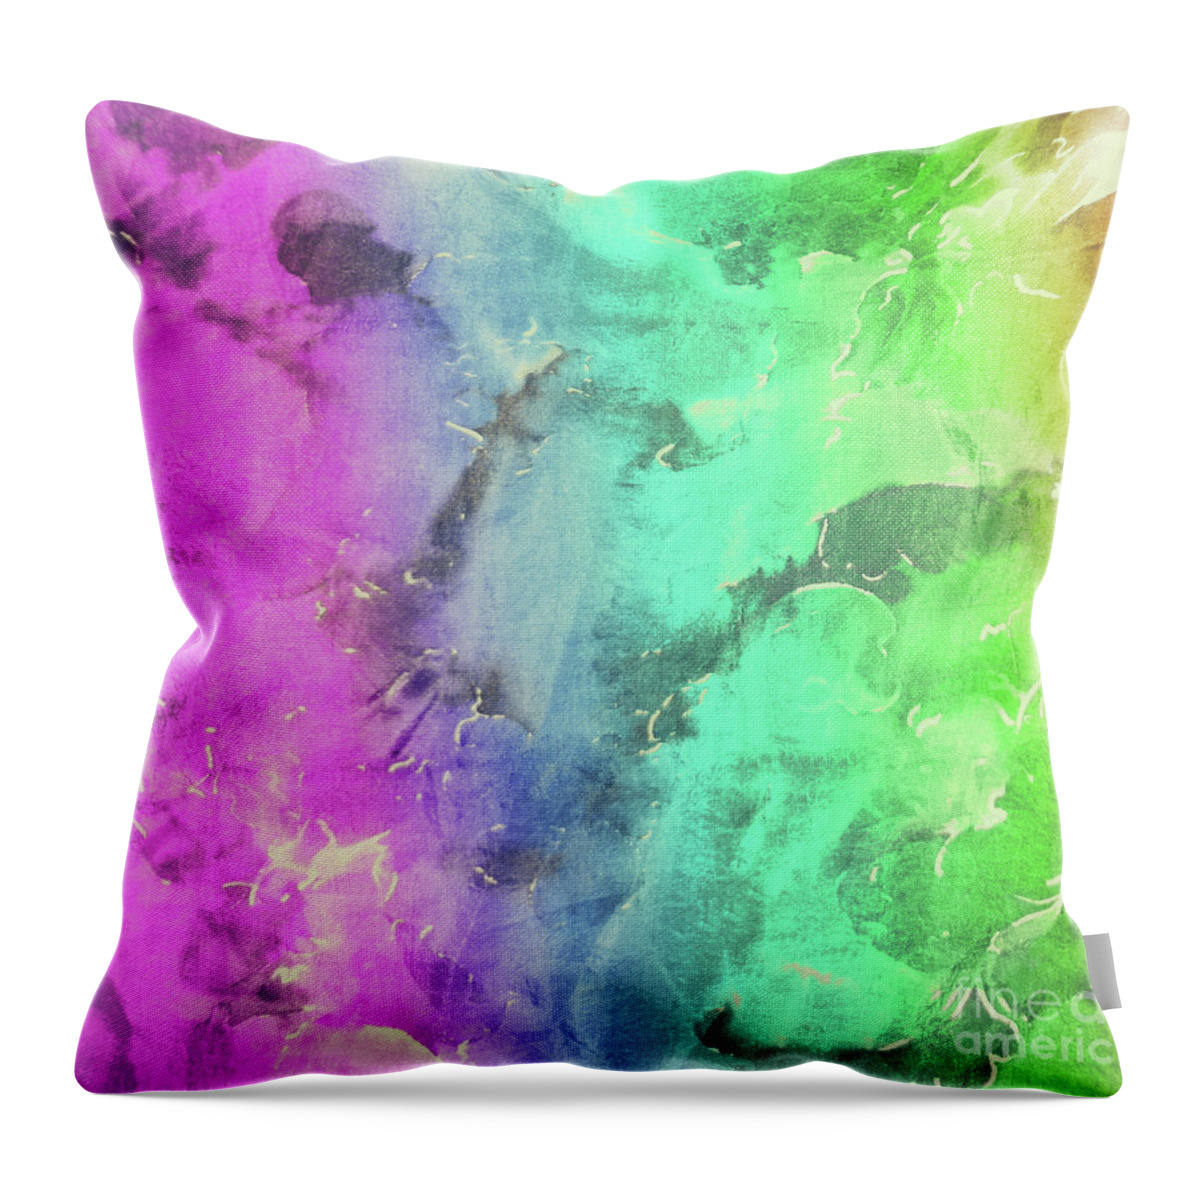 Tiedye Throw Pillow featuring the painting Rainbows and Tiedye by Mindy Sommers